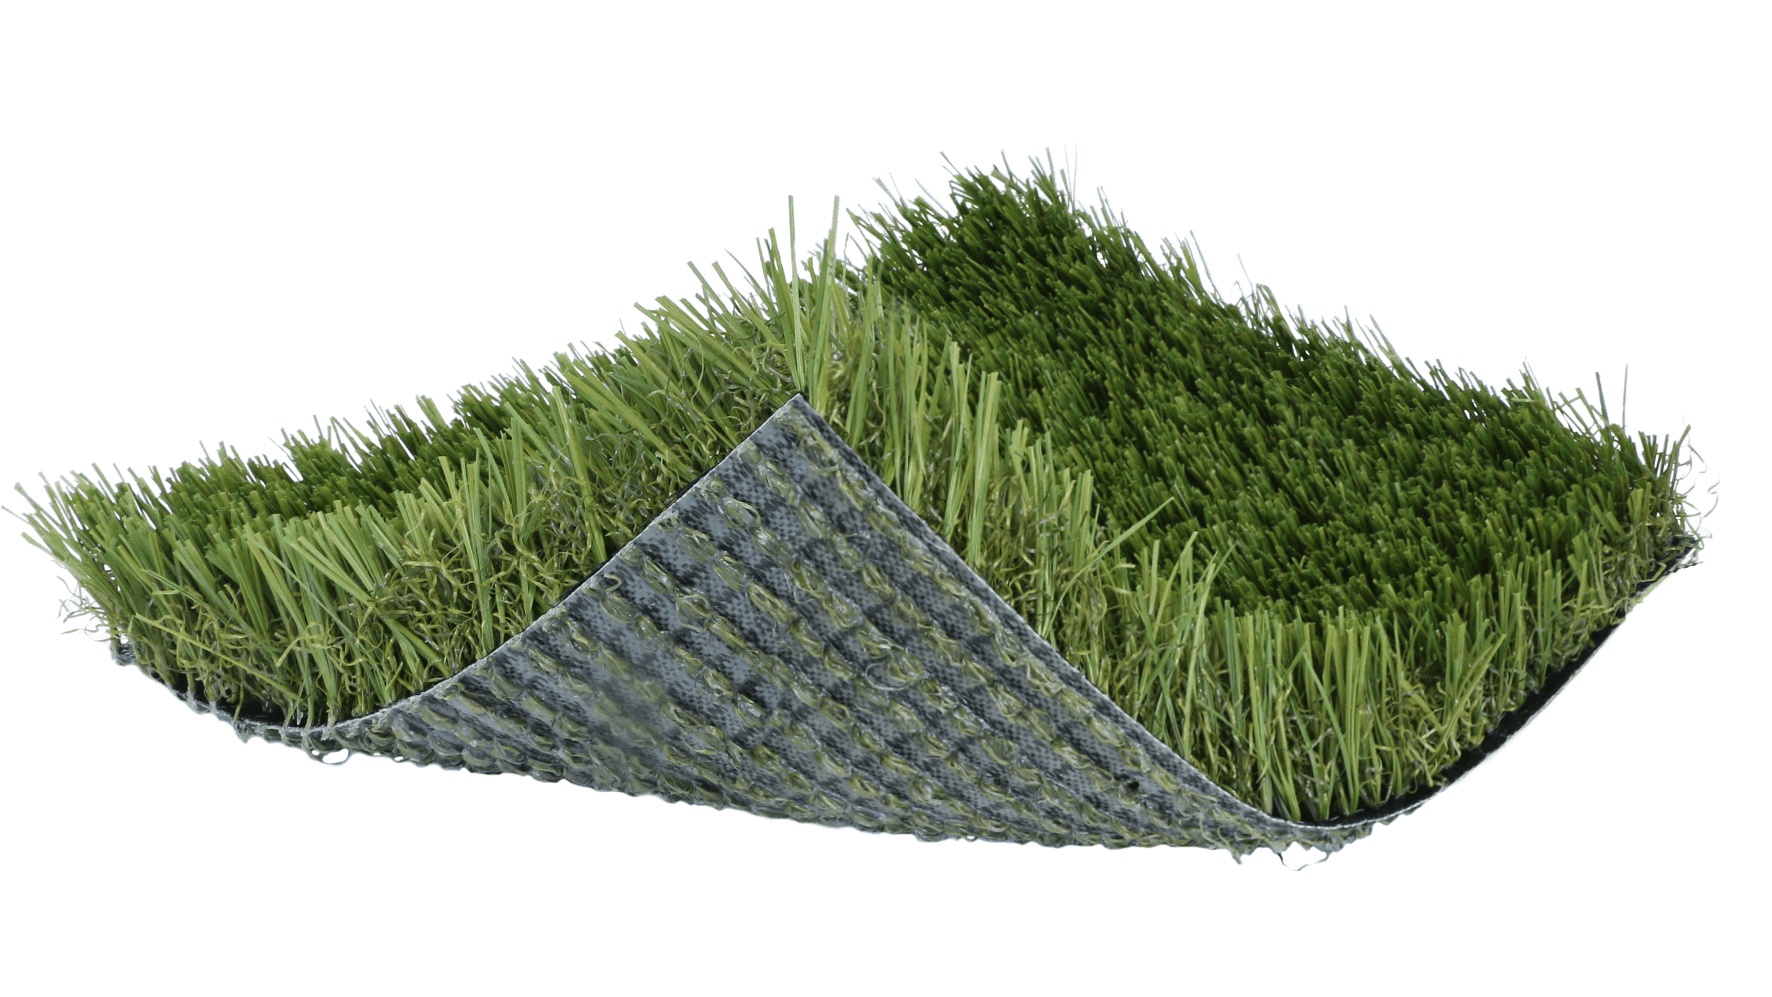 https://syntheticturf.efellecloud.com/products/softlawn-perennial-zoysia